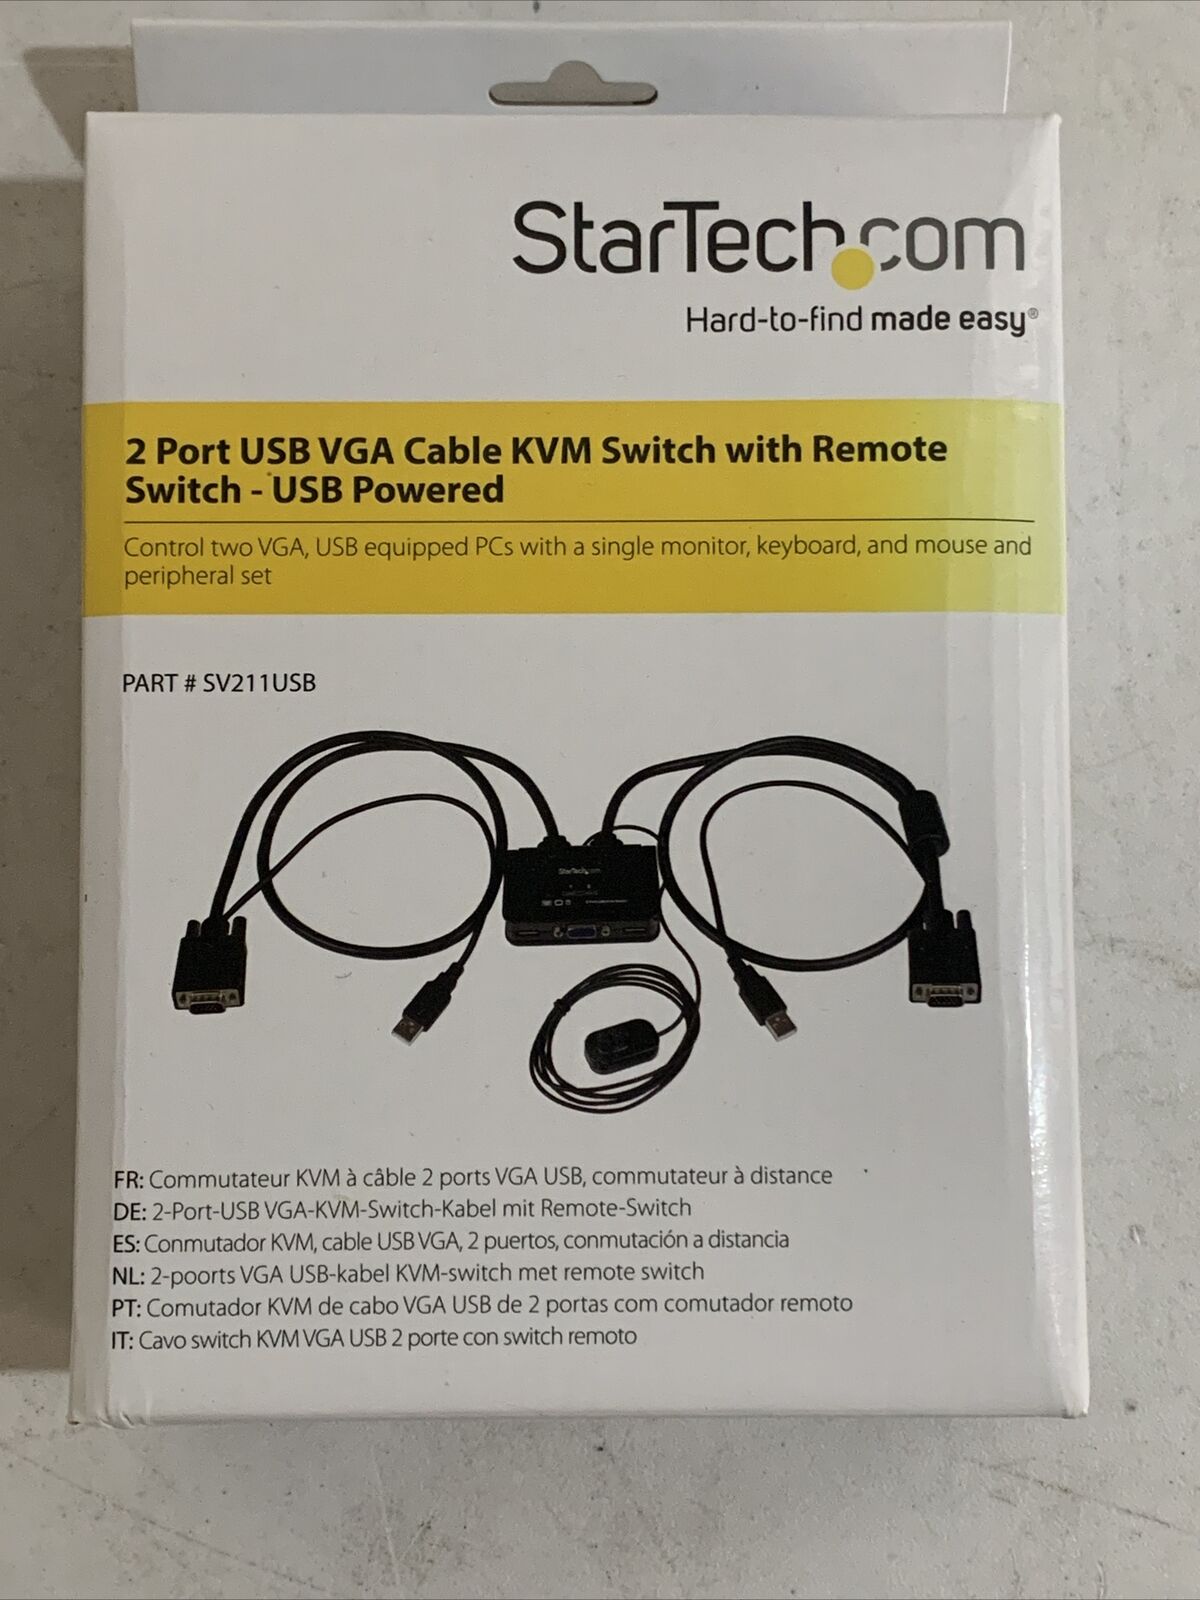 Startech.com - 2 Port USB VGA Cable KVM Switch With Remote Switch (1B6)